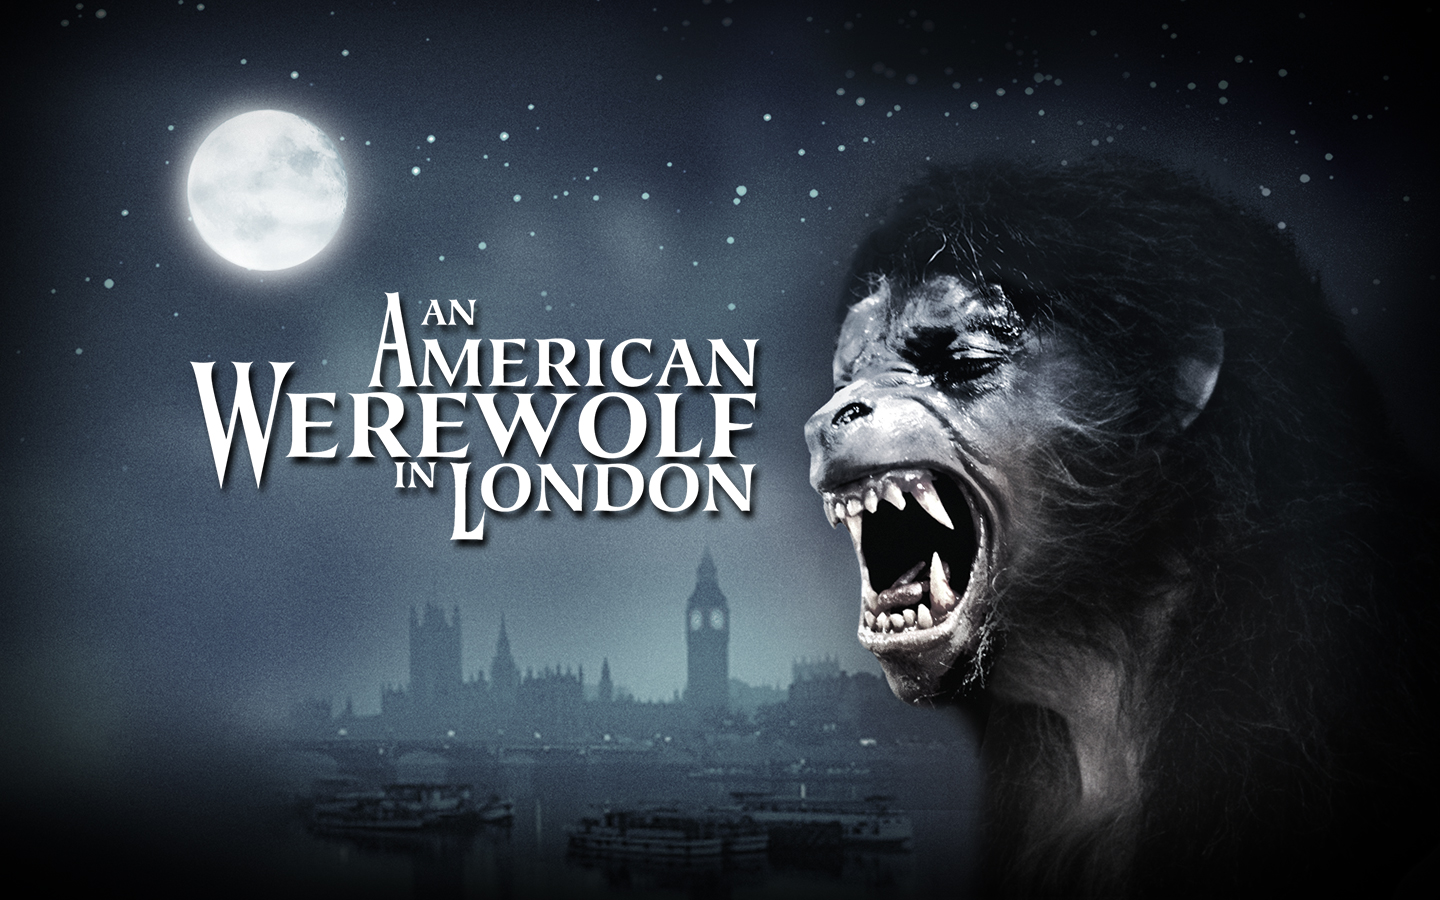 An American Werewolf in London and original content announced for HHN25